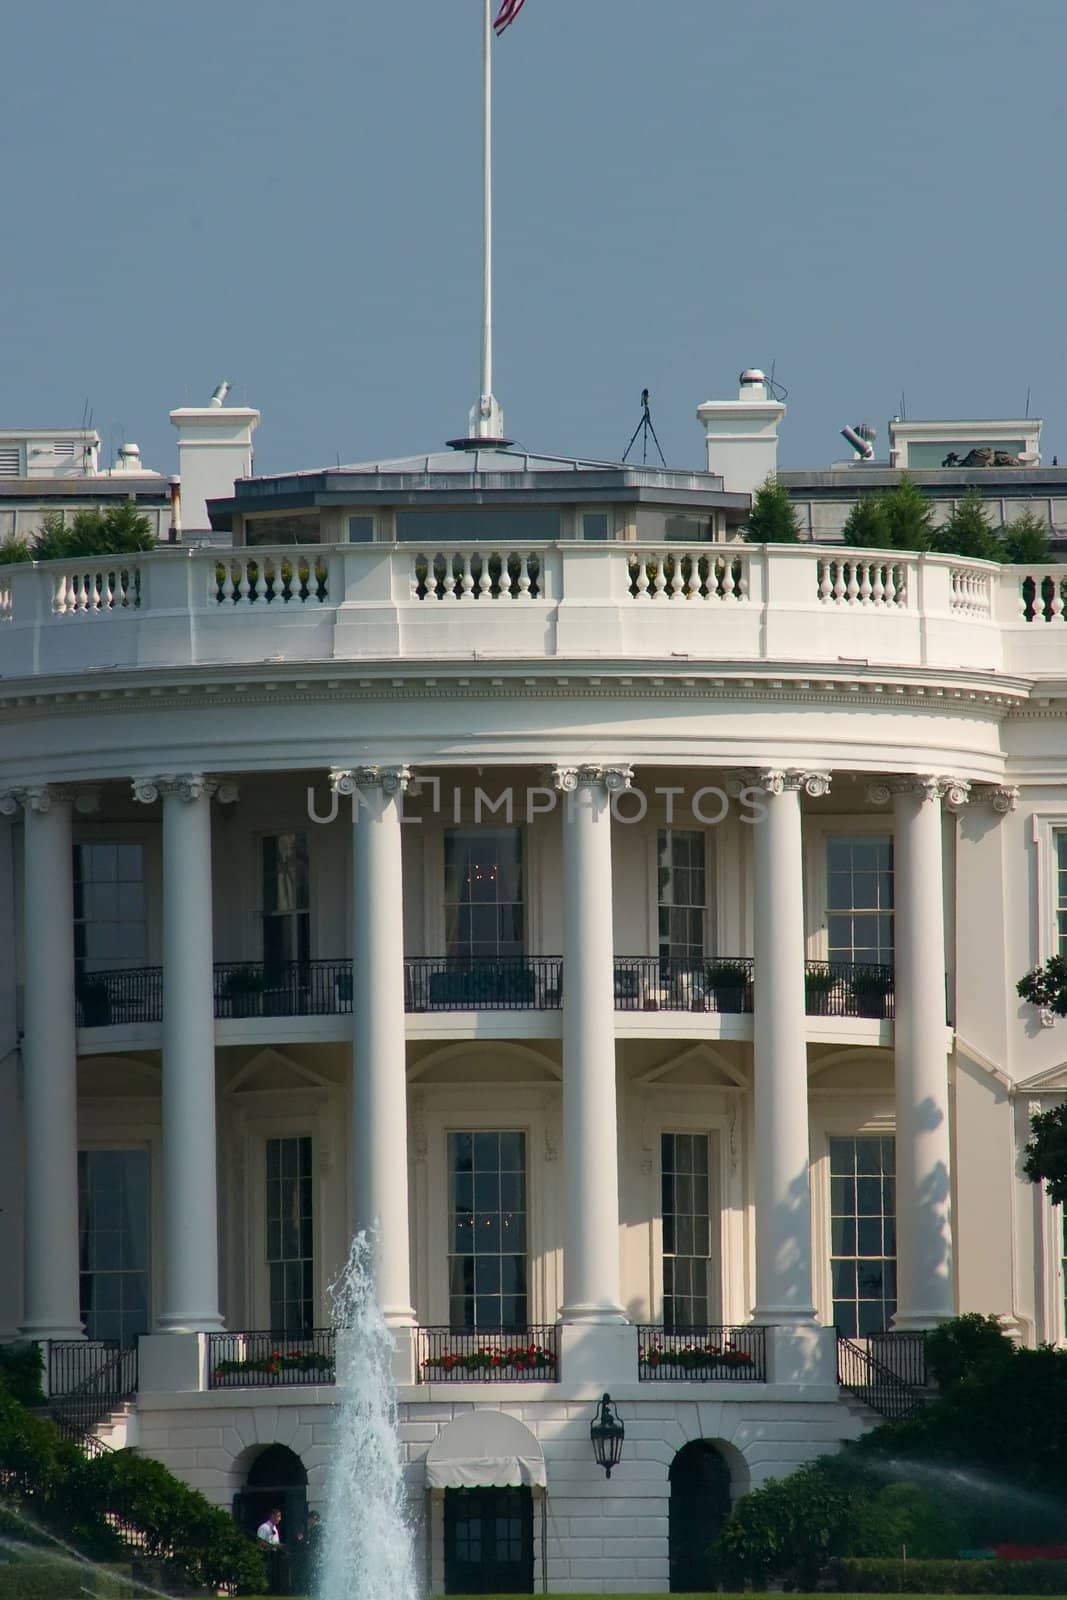 White house by melastmohican